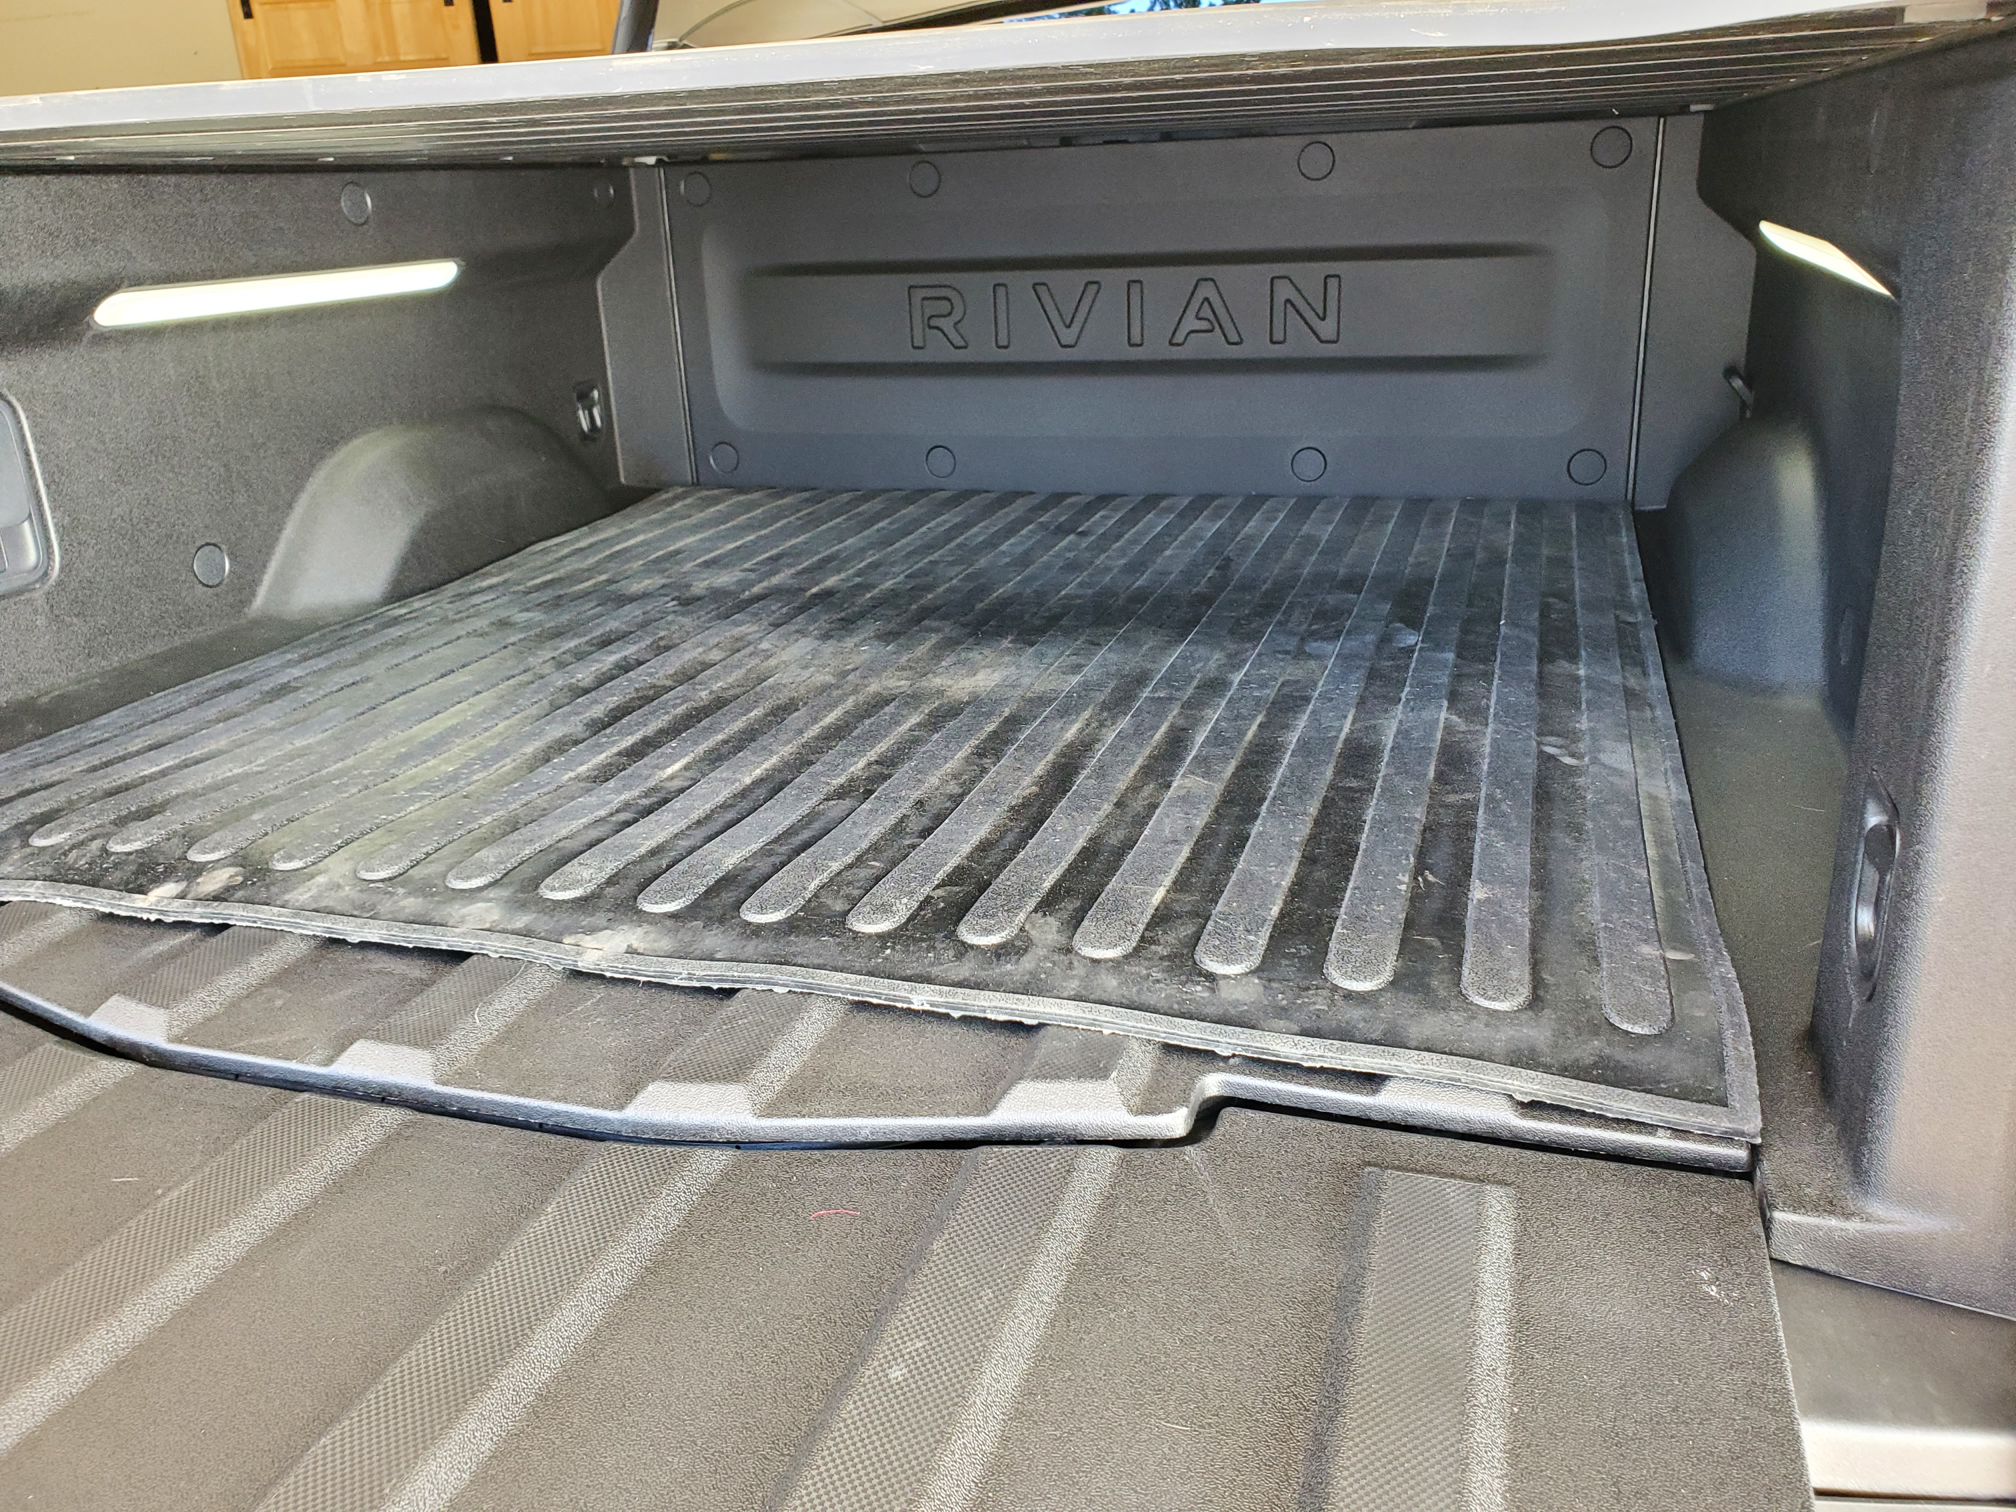 Rivian R1T R1S Accessories - Floor console organizer / Tesla Charger Adapter / Phone Mount / Bed Mat / Etc. 1655861239851